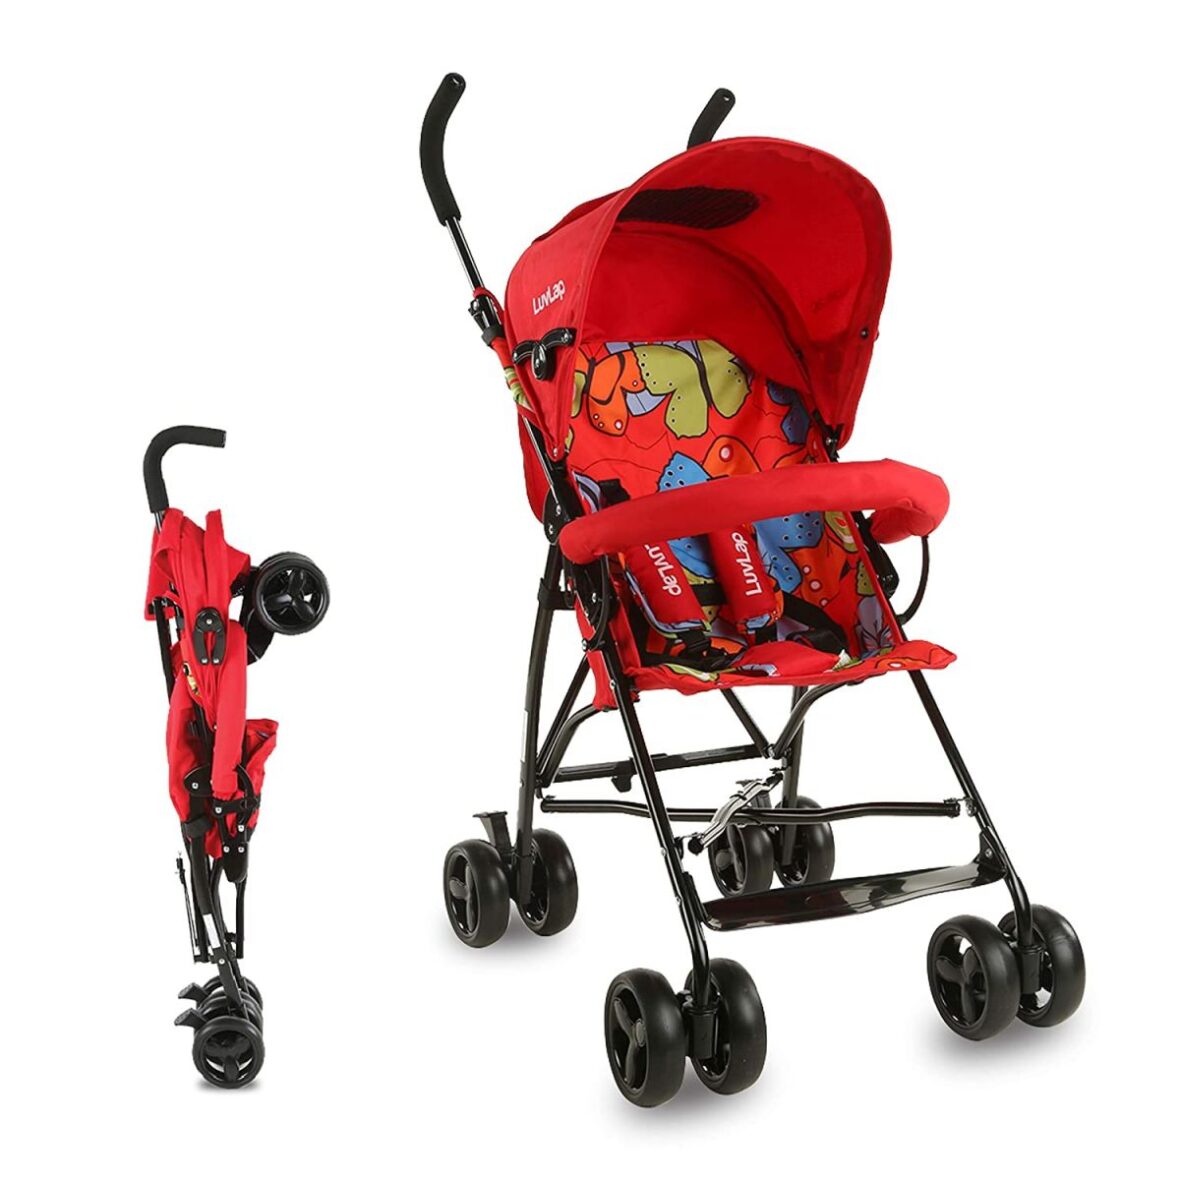 Luvlap Black Tutti Frutti Stroller Buggy Compact And Travel Friendly For Baby – Red 18273